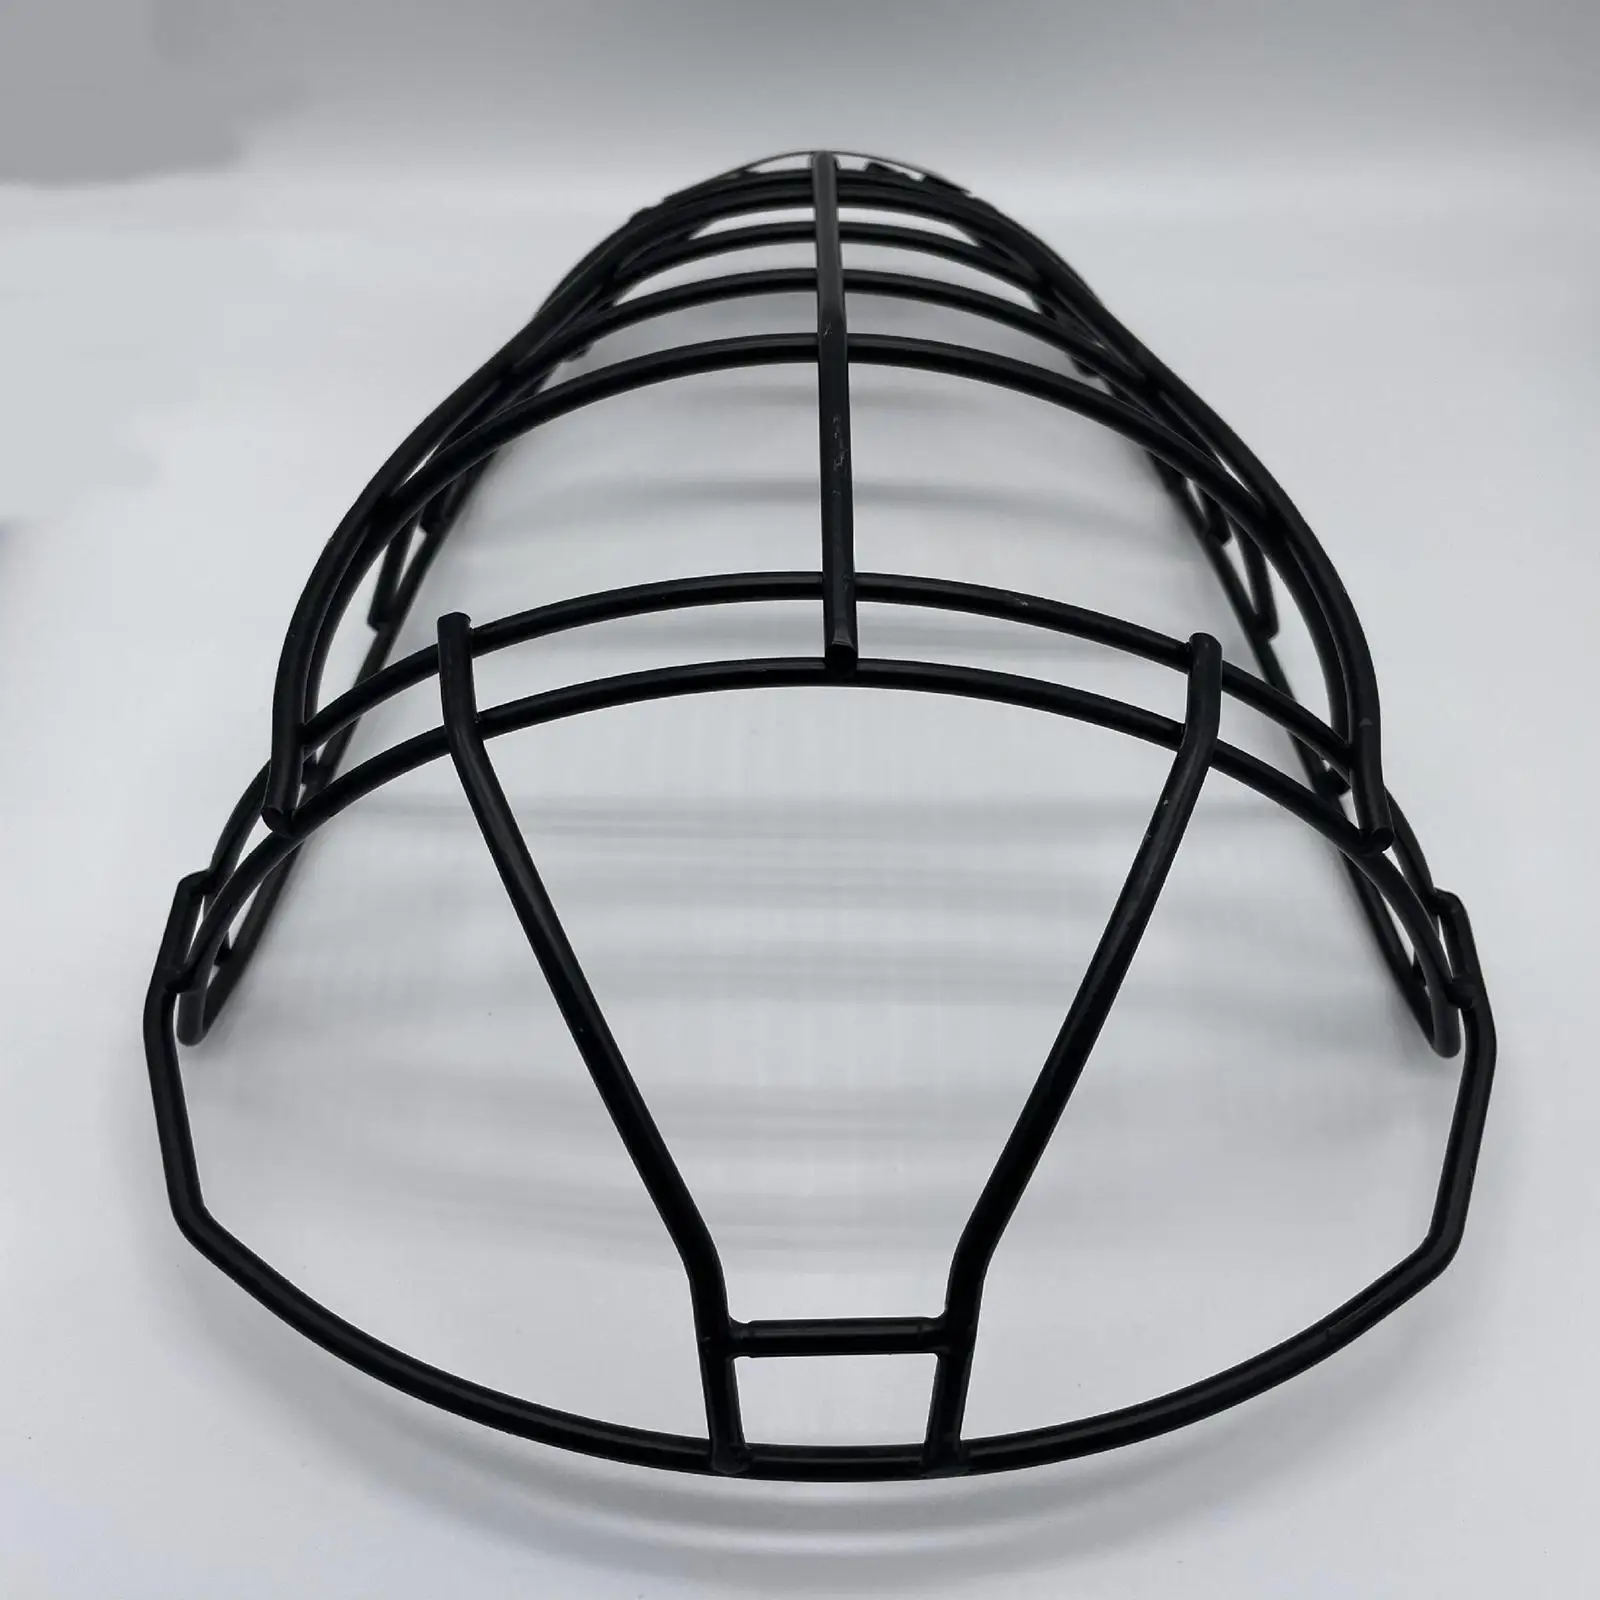 Durable Batting Helmet Mask Lightweight Wire Face Protective Safety Sports Accessories Baseball Face Guard for Teeball Softball